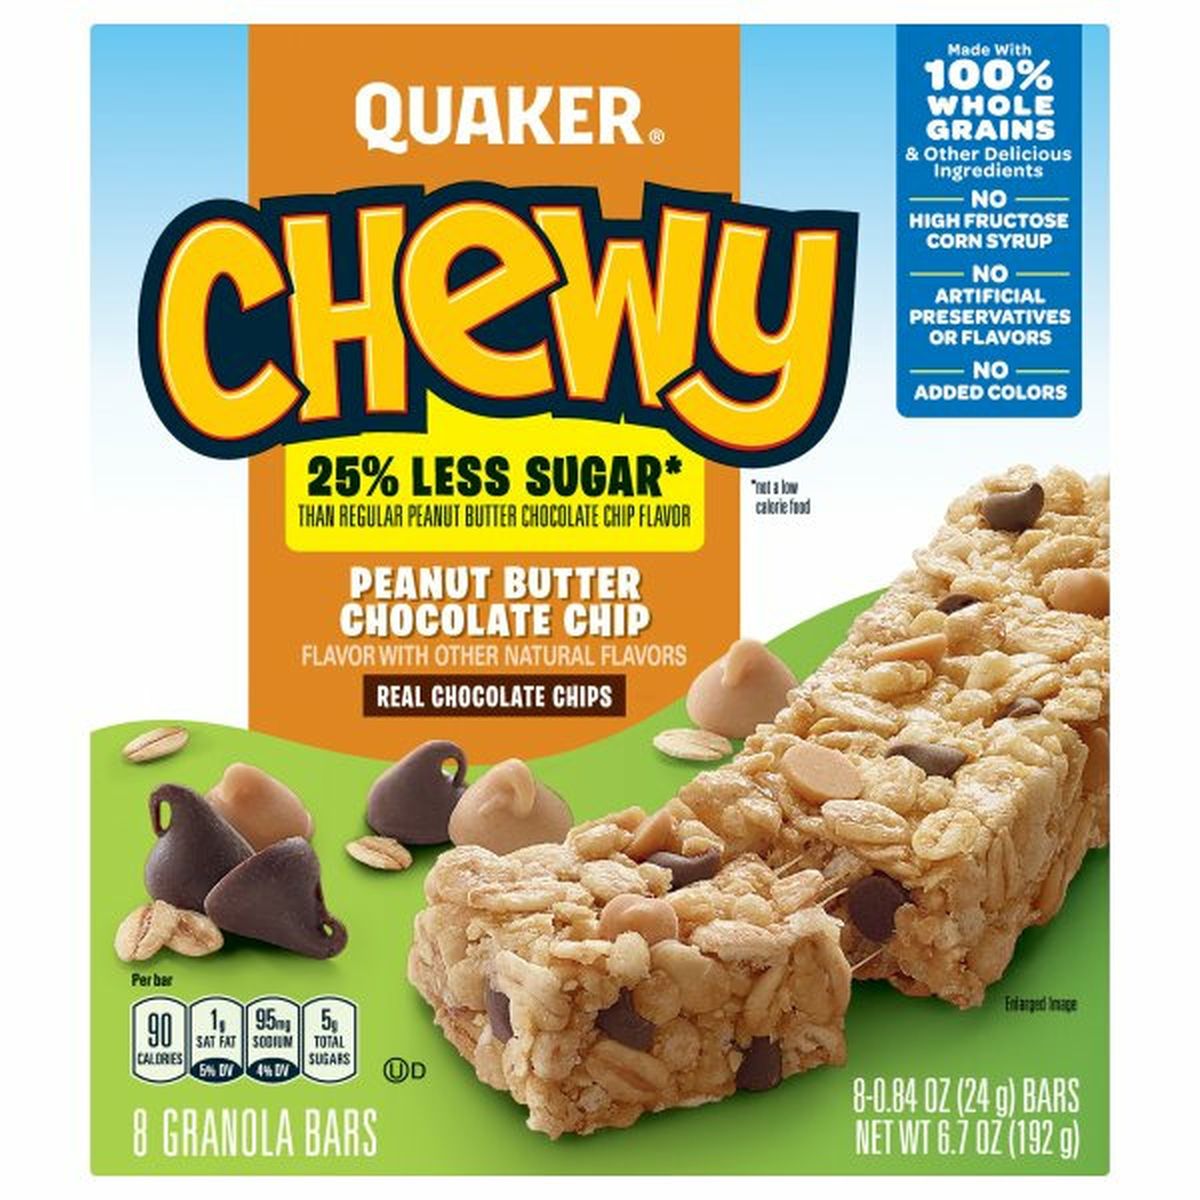 Calories in Quaker Chewy Granola Bars, Peanut Butter Chocolate Chip